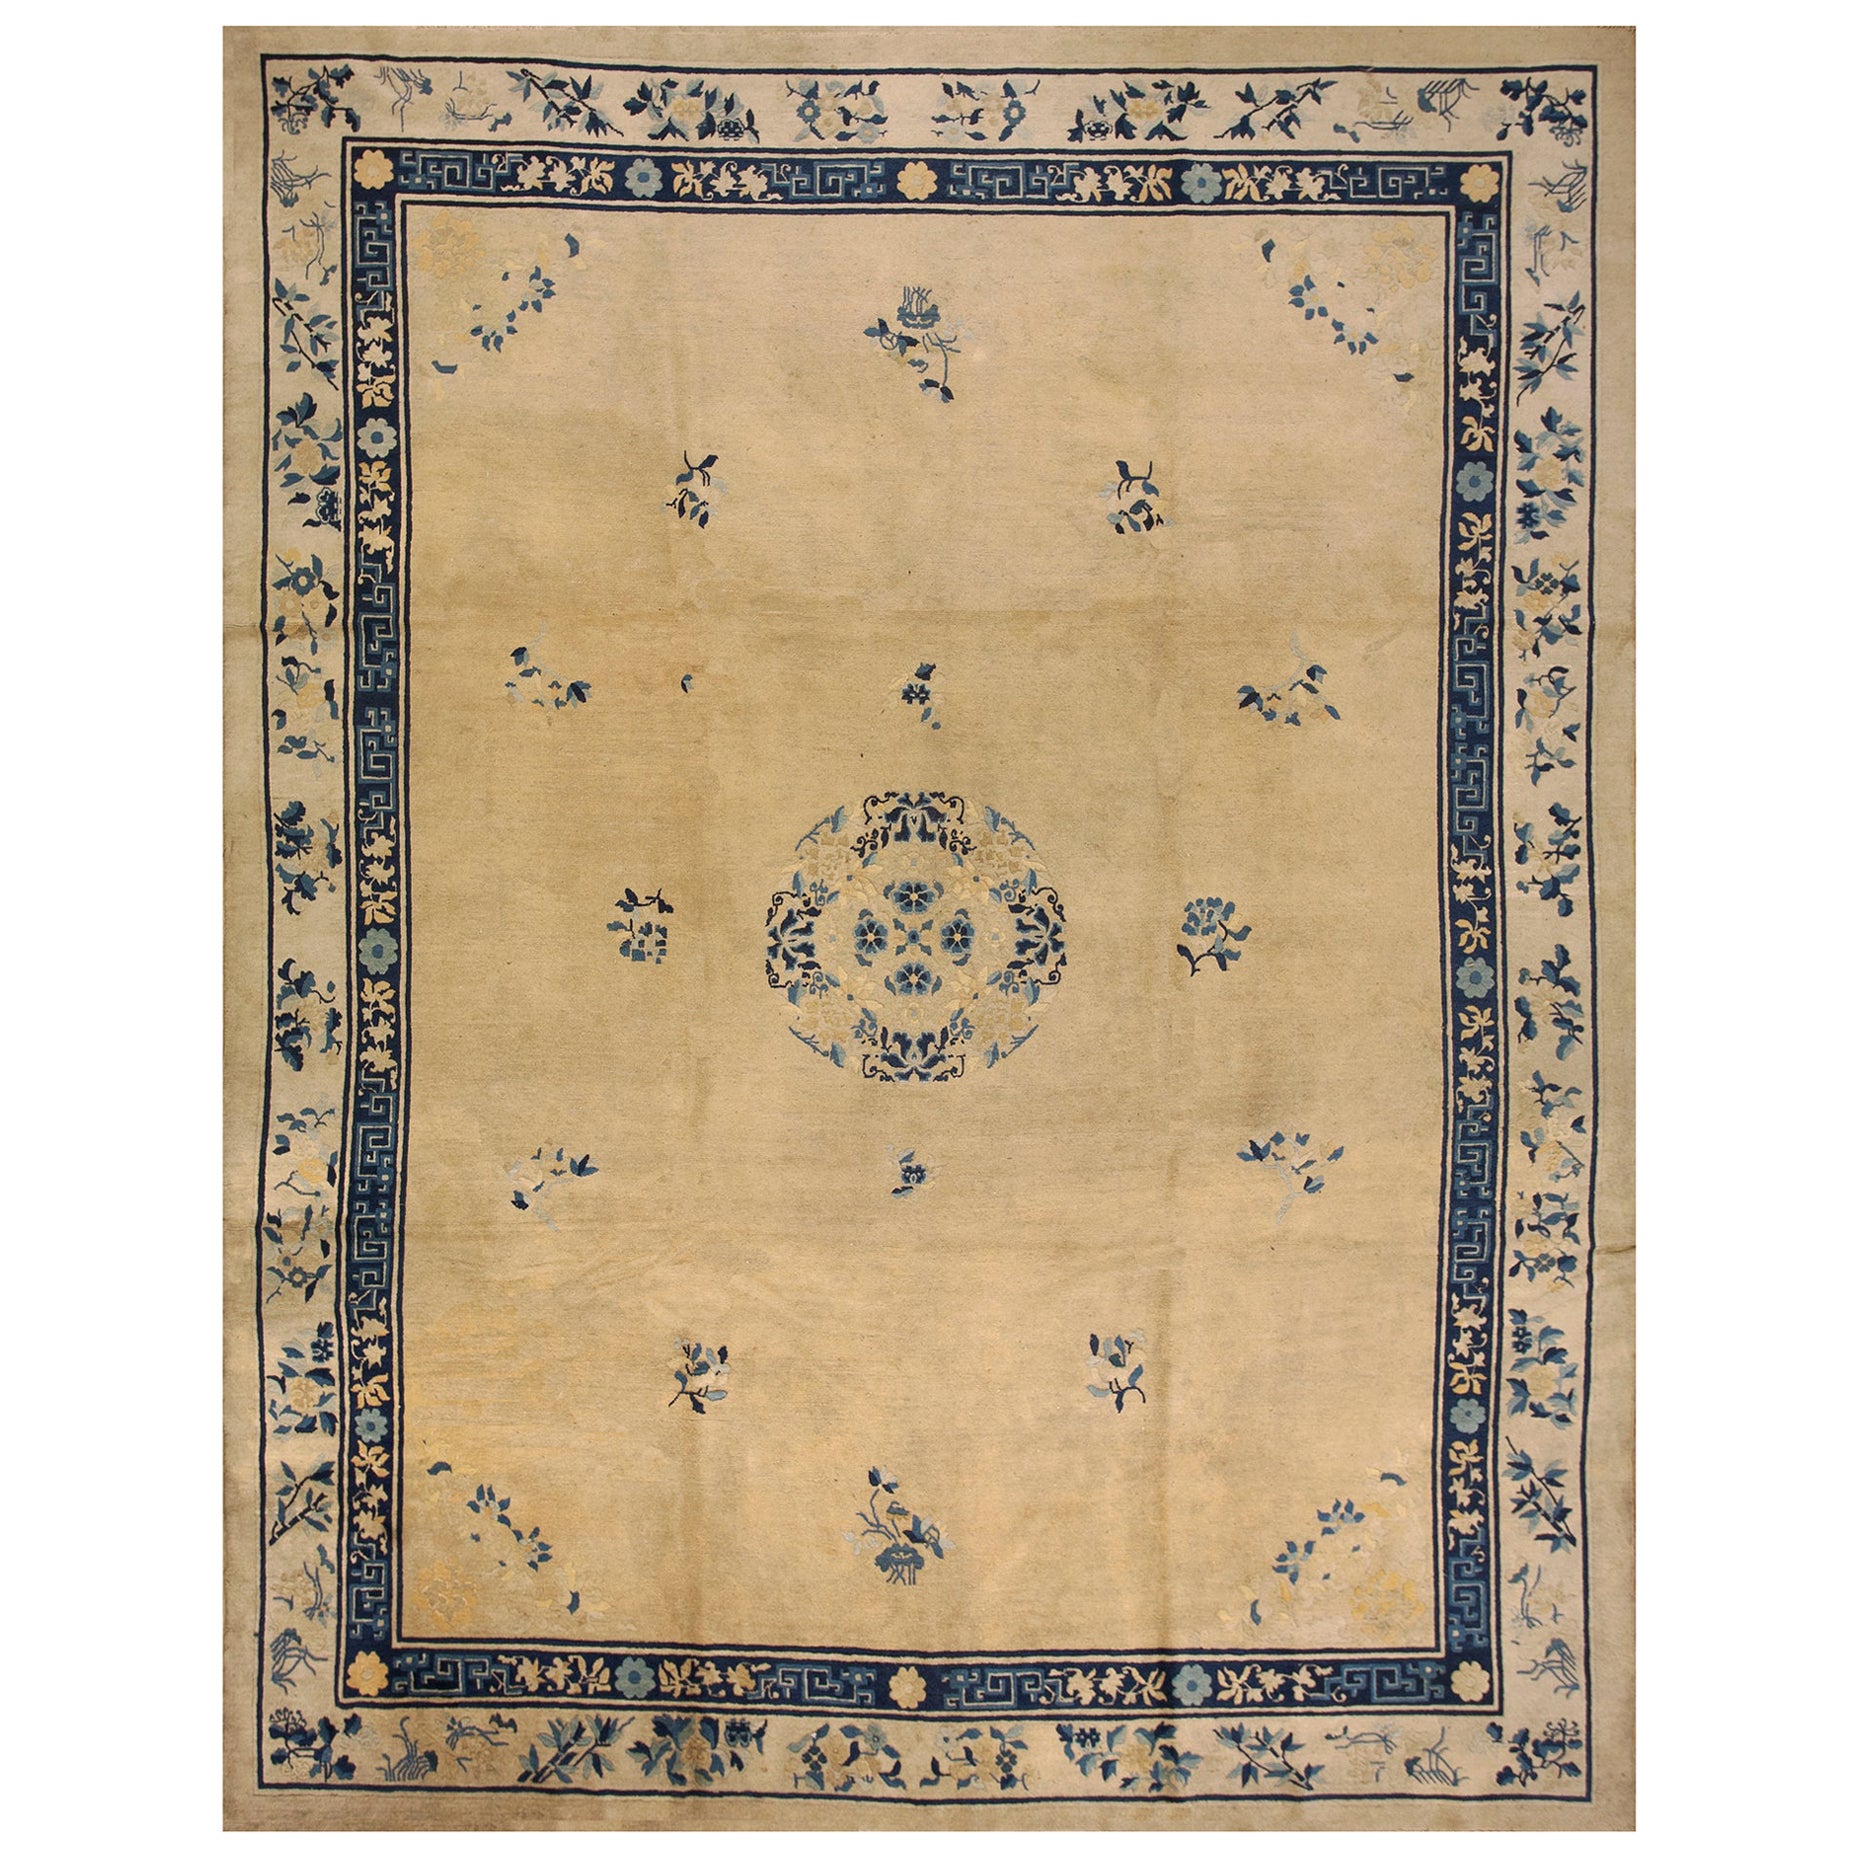 Early 20th Century Chinese Peking Carpet ( 9'1" x 11'7" - 275 x 353 ) For Sale